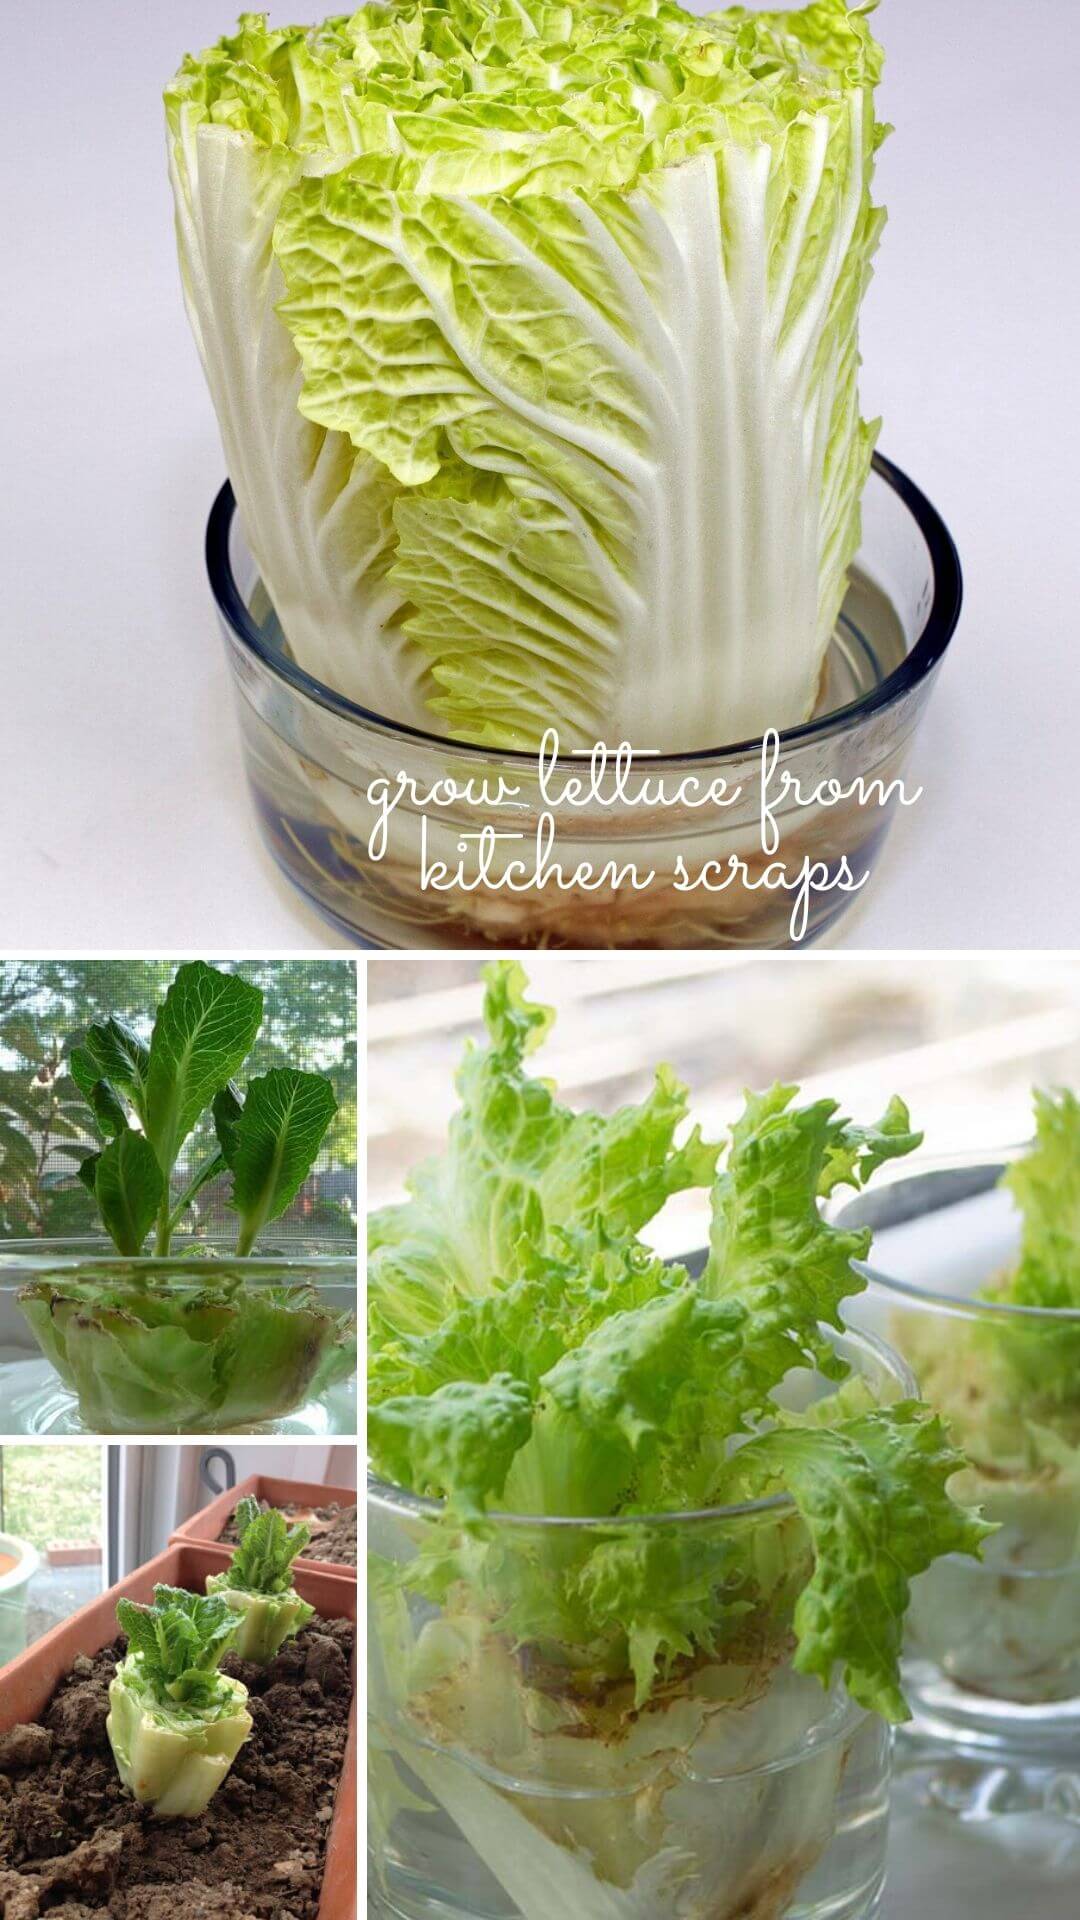 How to grow lettuce and cabbage from kitchen scraps